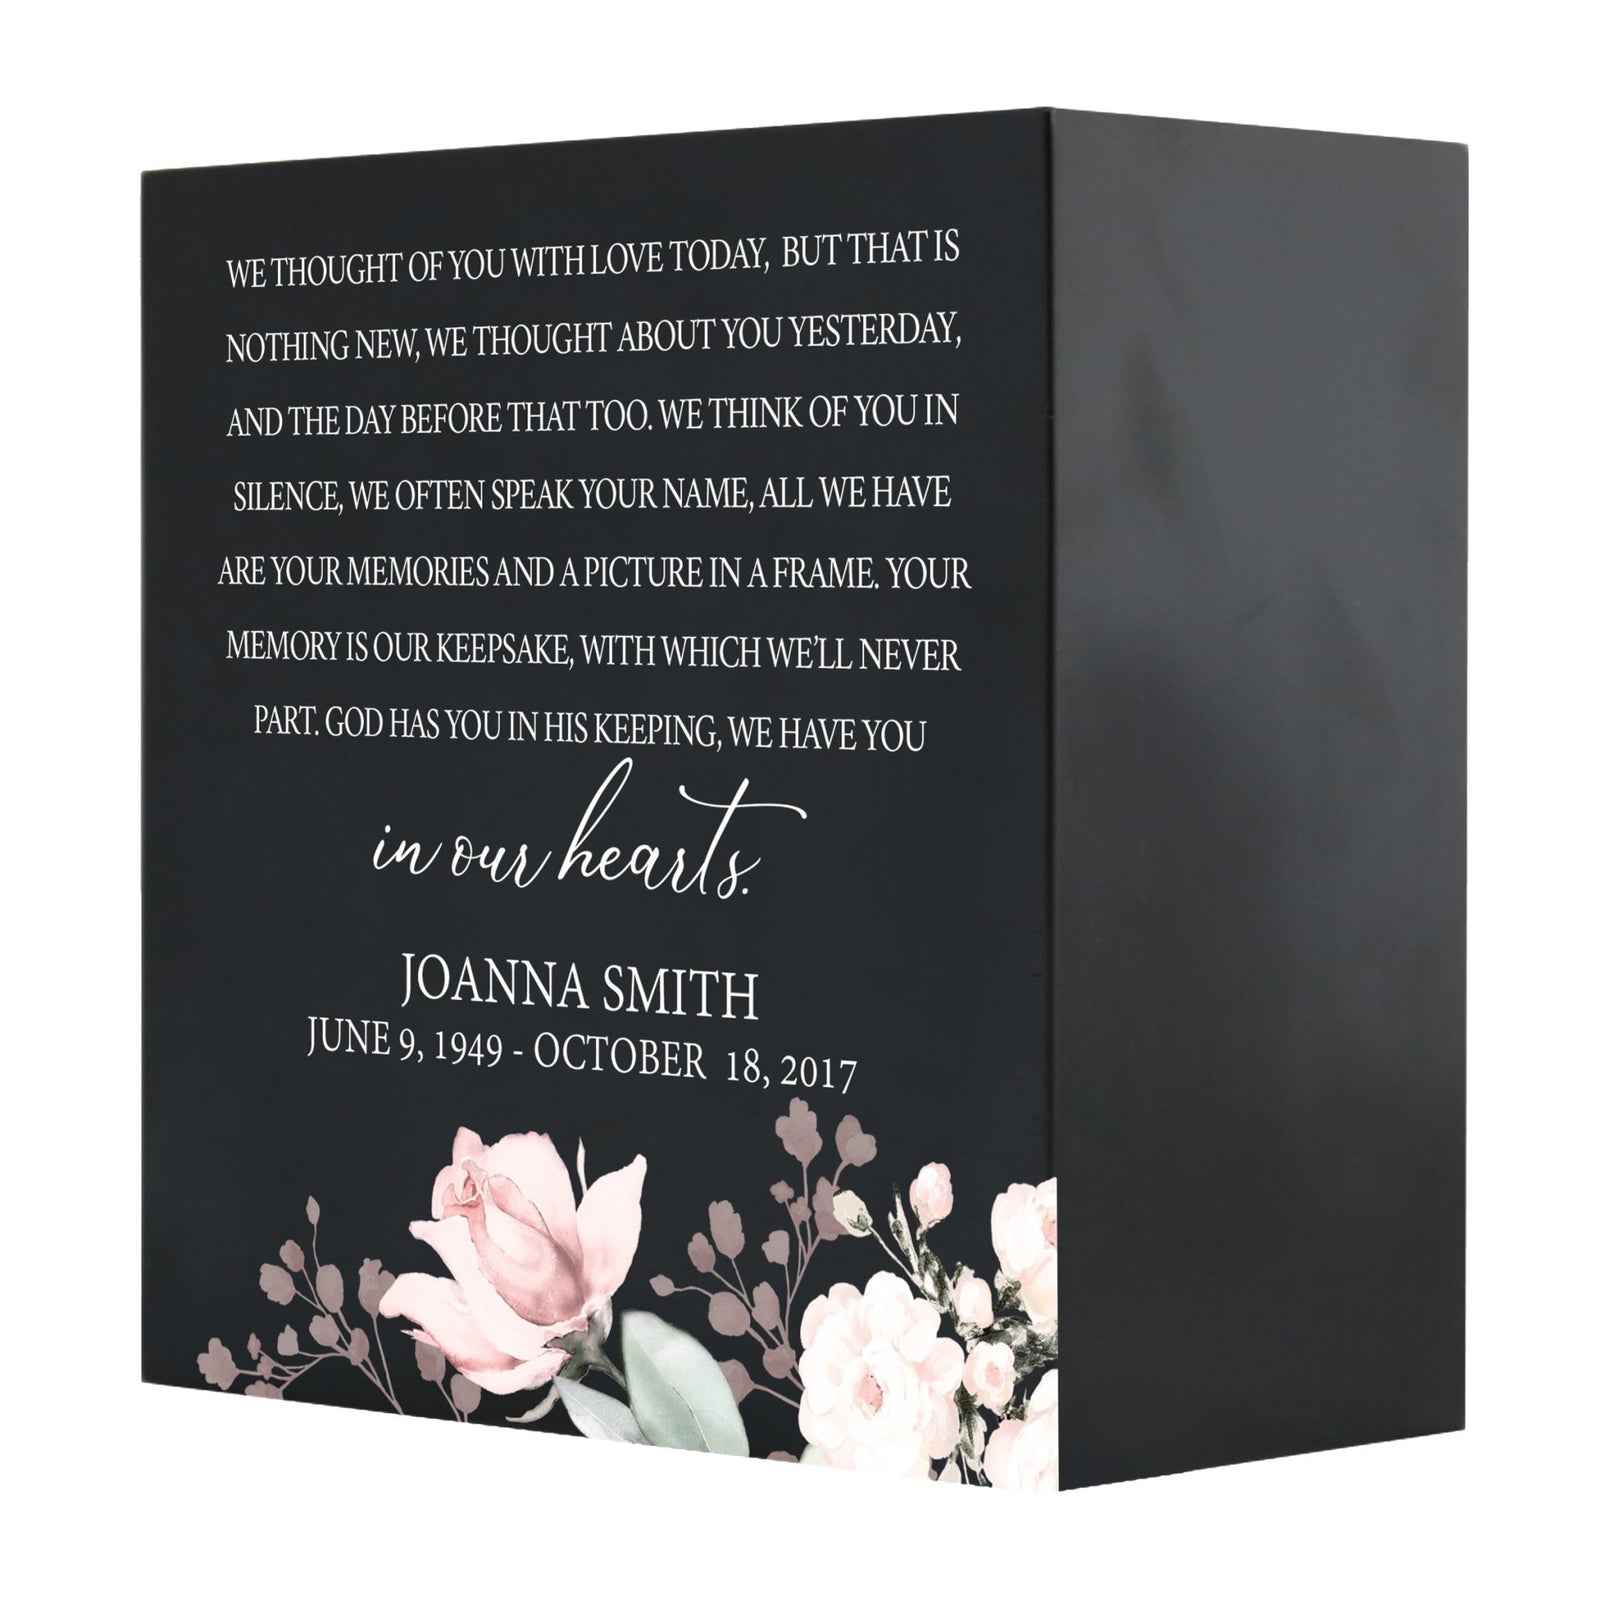 Personalized Modern Inspirational Memorial Wooden Shadow Box and Urn 6x6 holds 53 cu in of Human Ashes - We Thought Of You (Black) - LifeSong Milestones